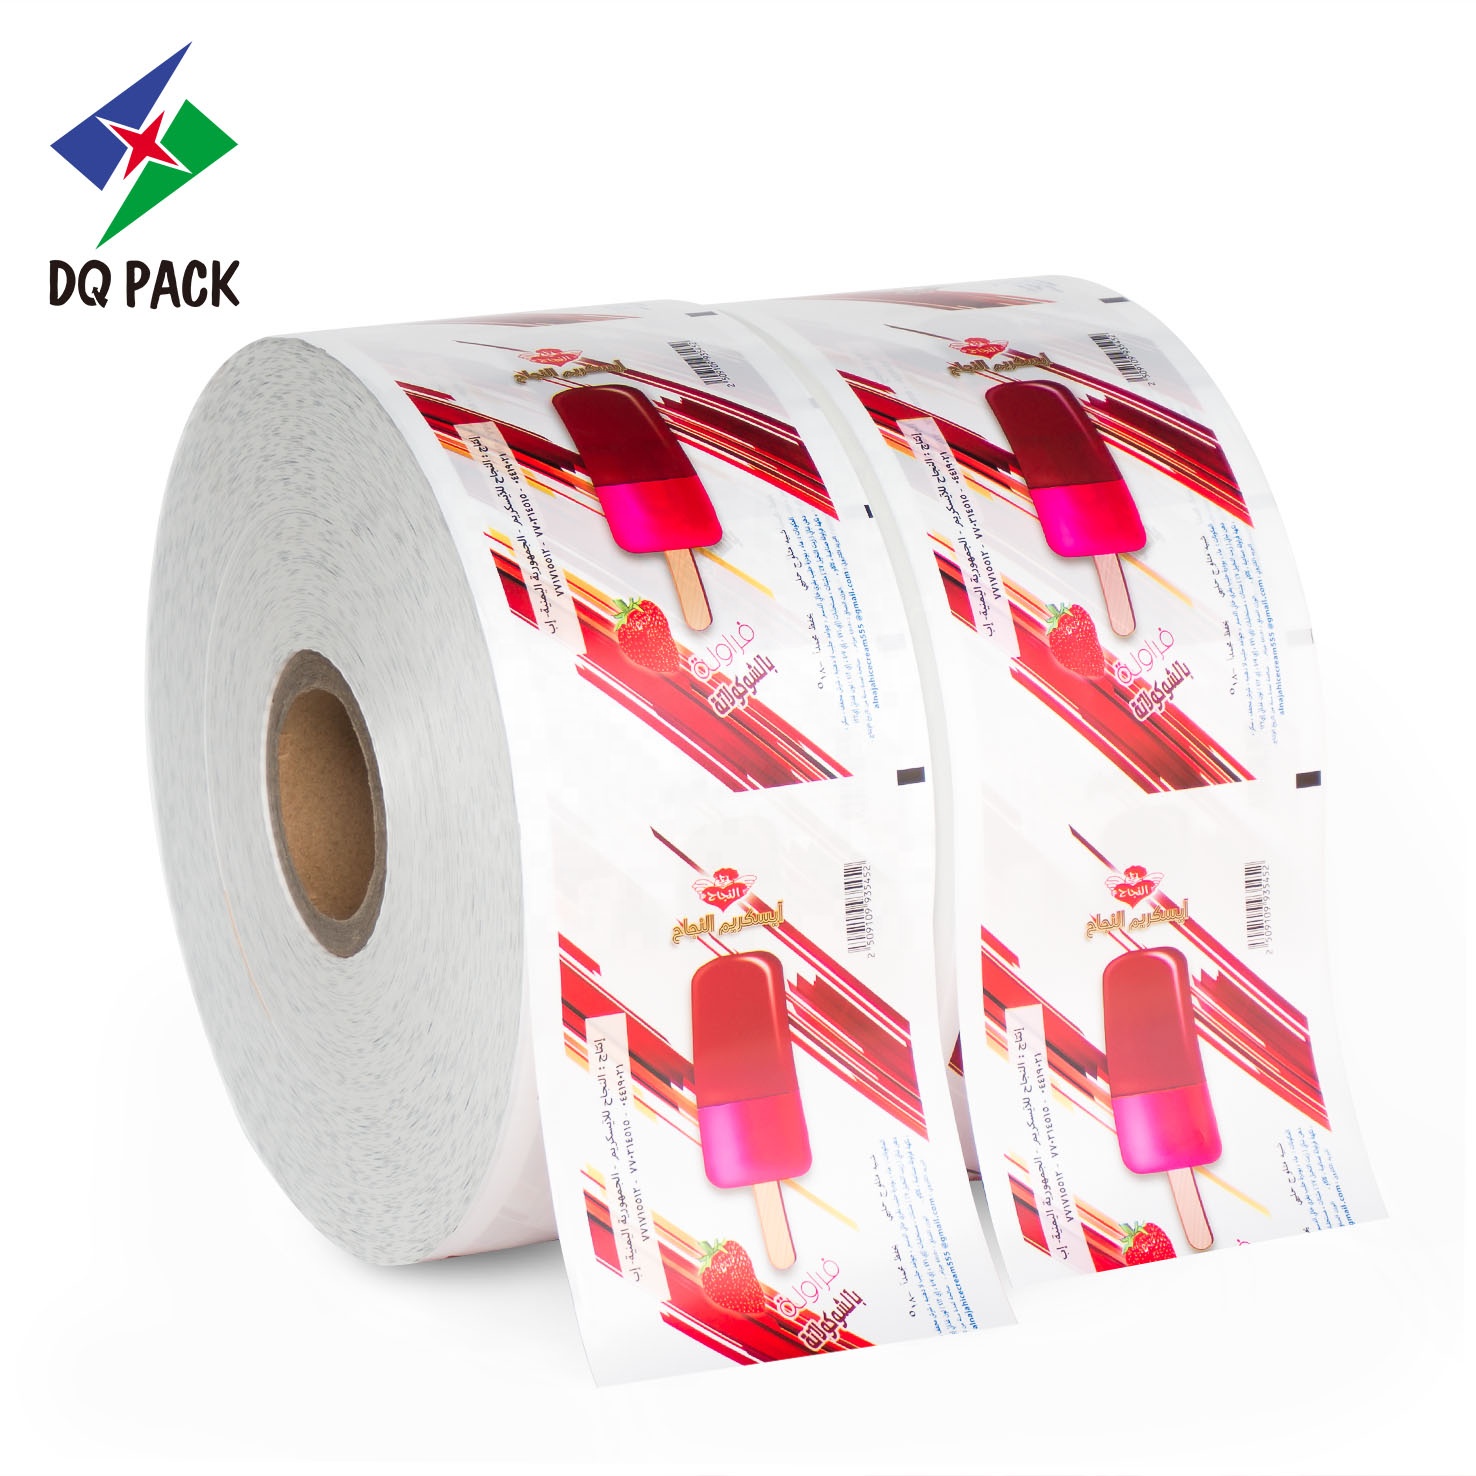 DQ PACK Hot Sale Low Cost Pearl BOPP Packaging For Ice Cream